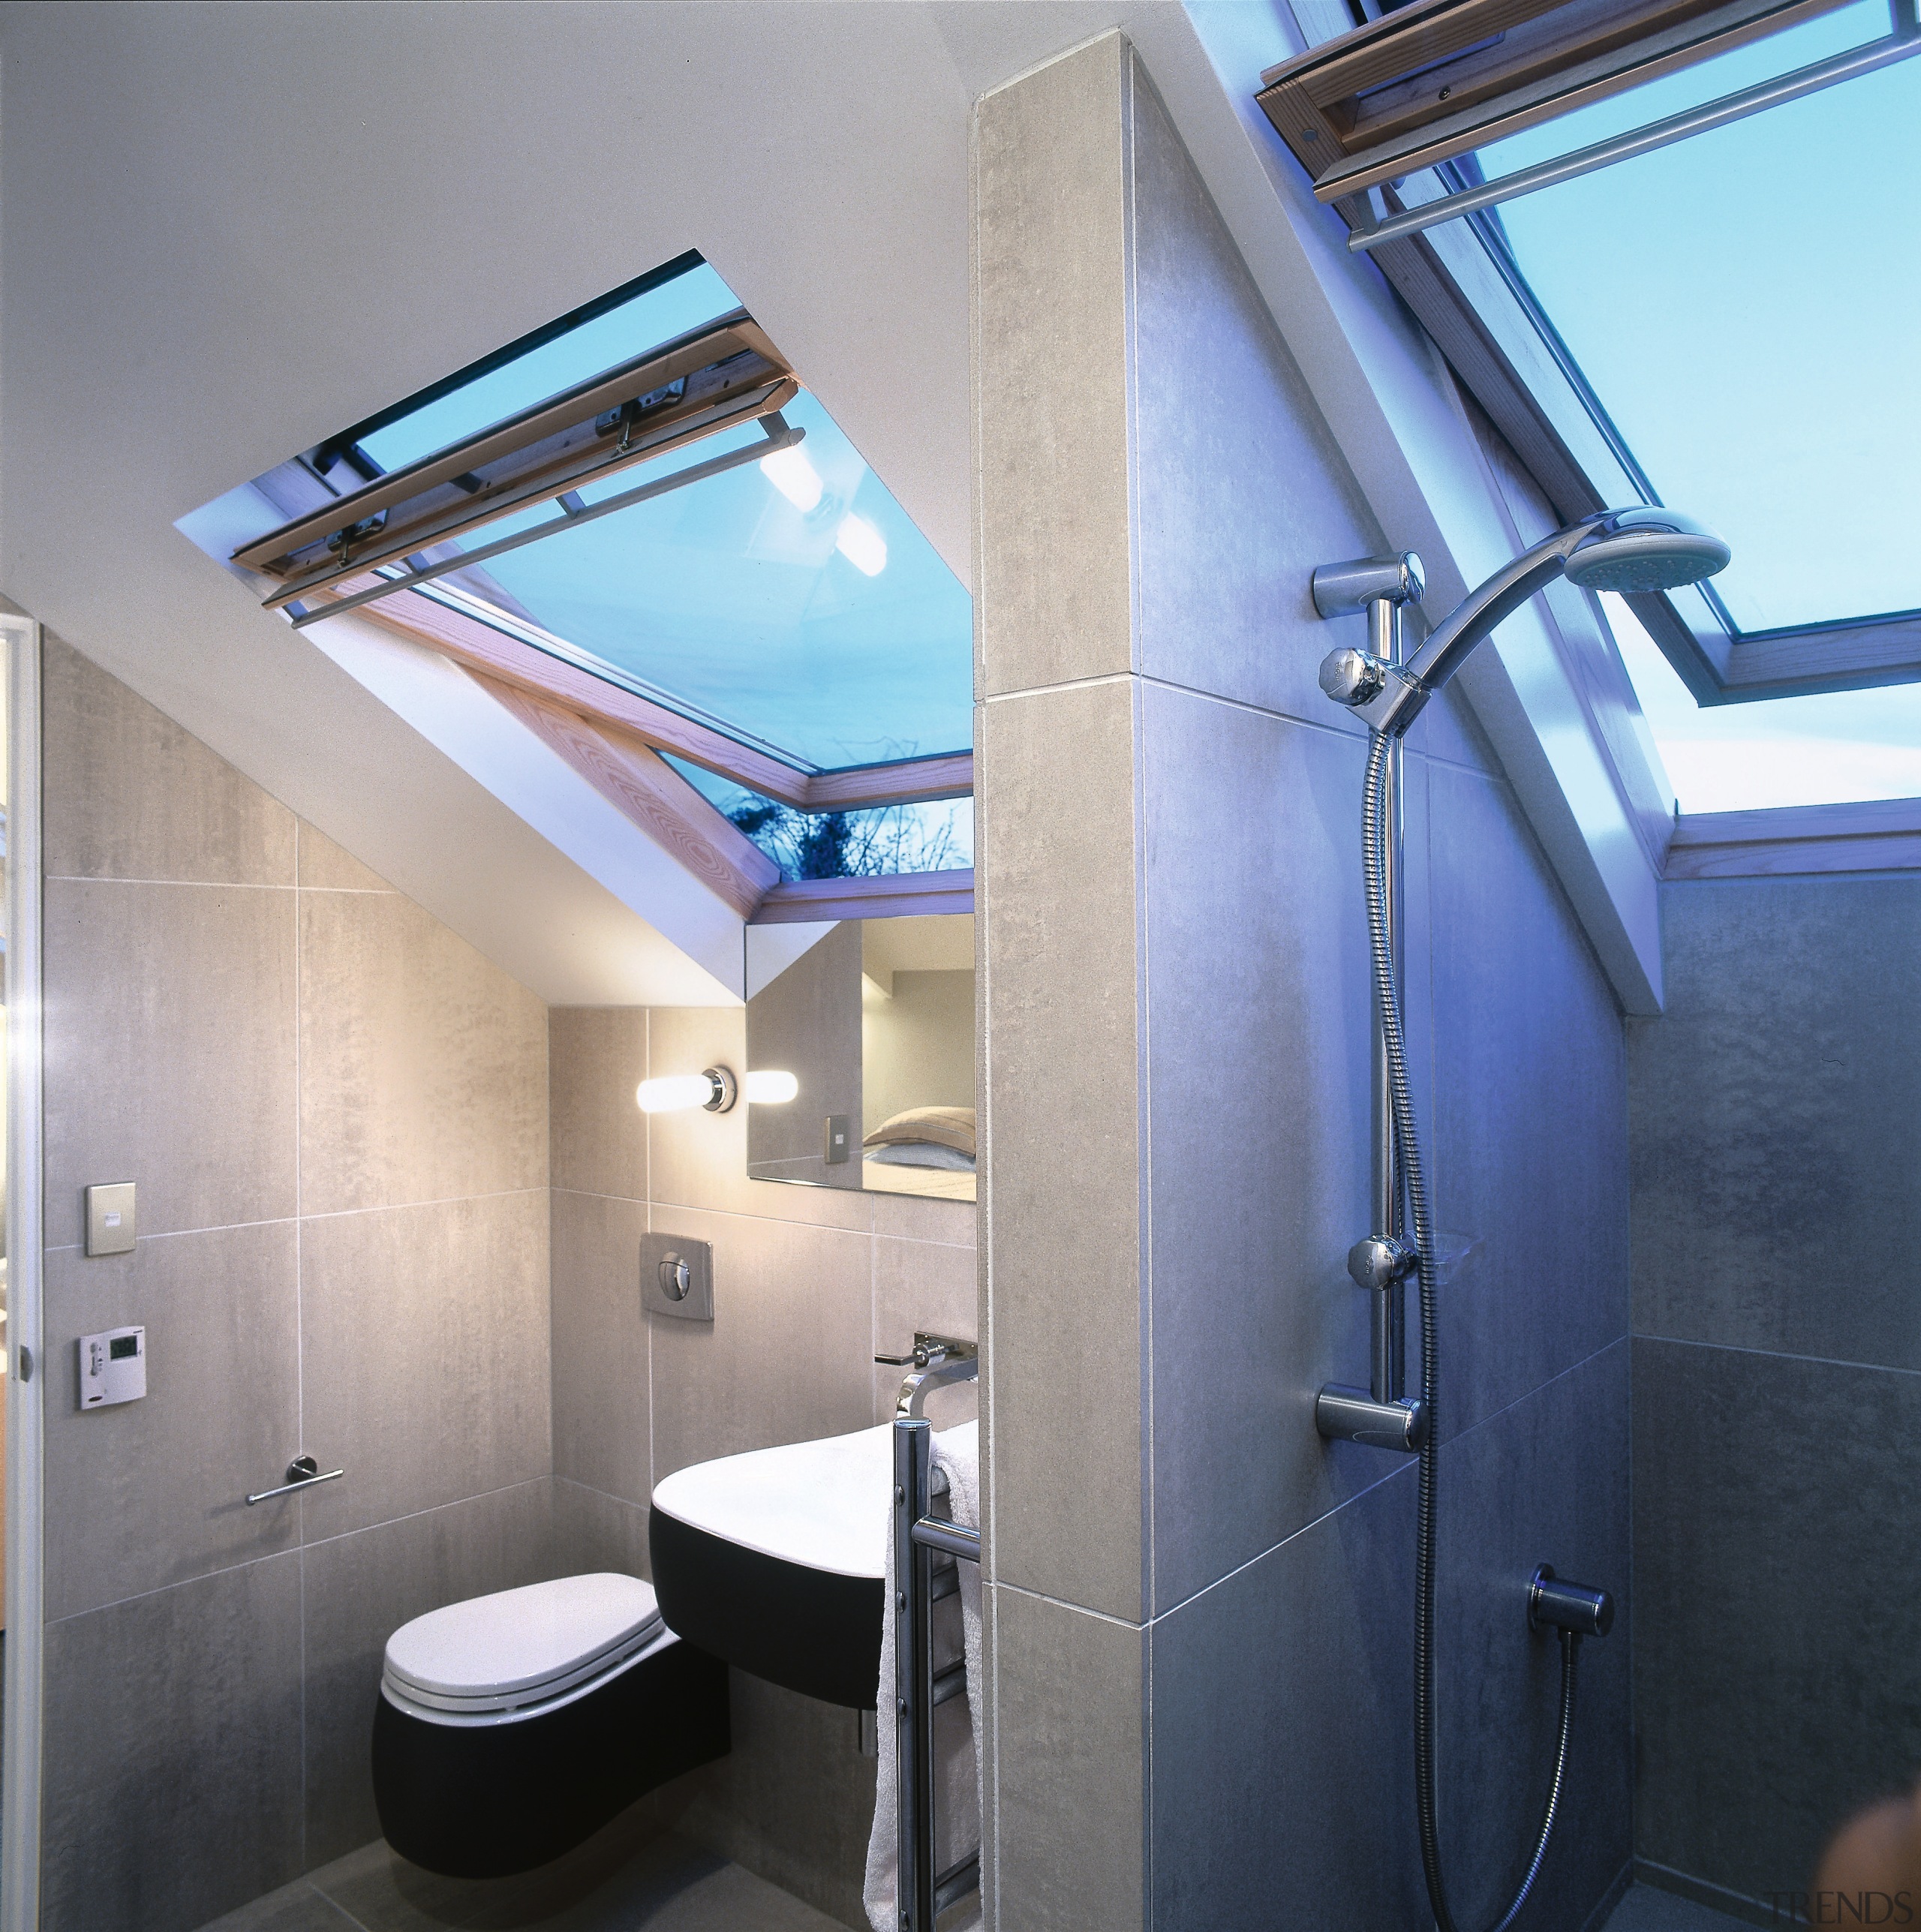 Velux windows add a sense of height in architecture, bathroom, ceiling, daylighting, interior design, room, gray